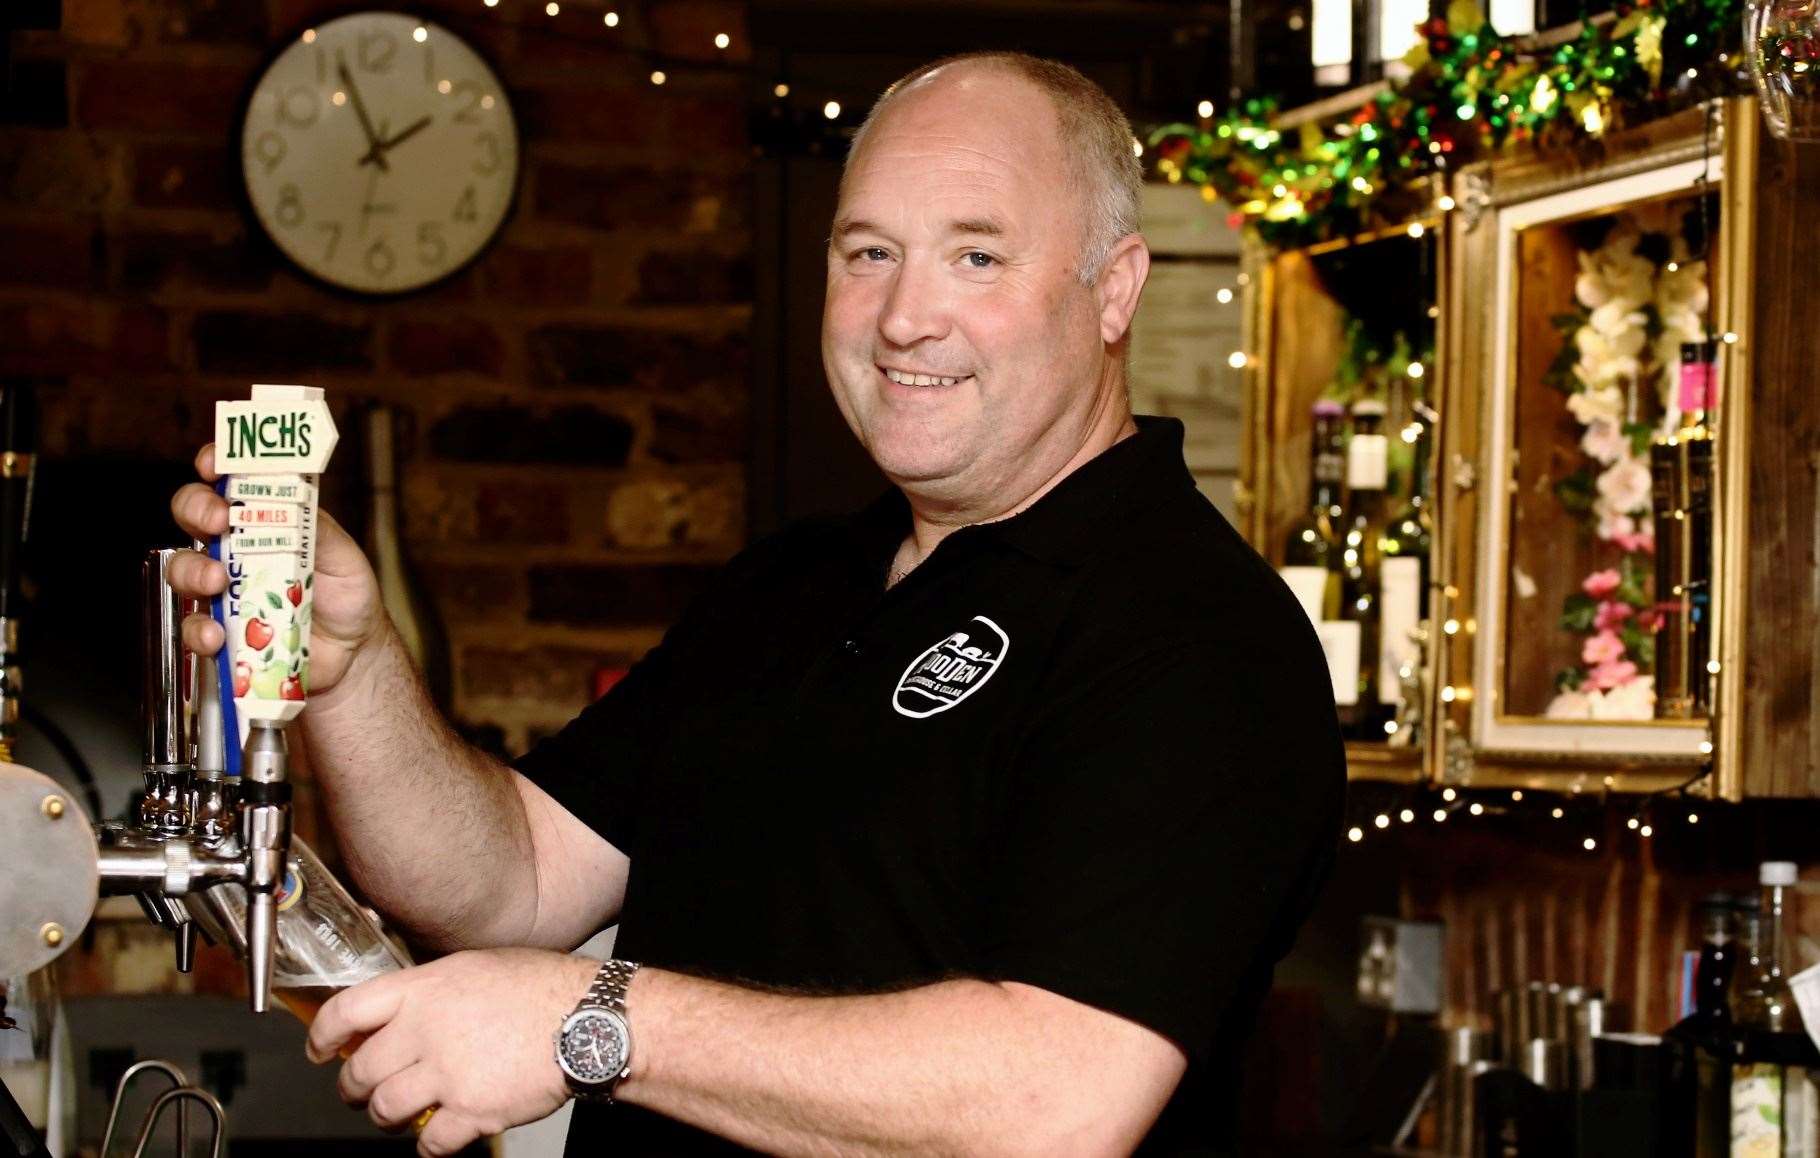 Howard Lapish has employed about 200 people during his time at the pub. Picture: Star Pubs and Bars